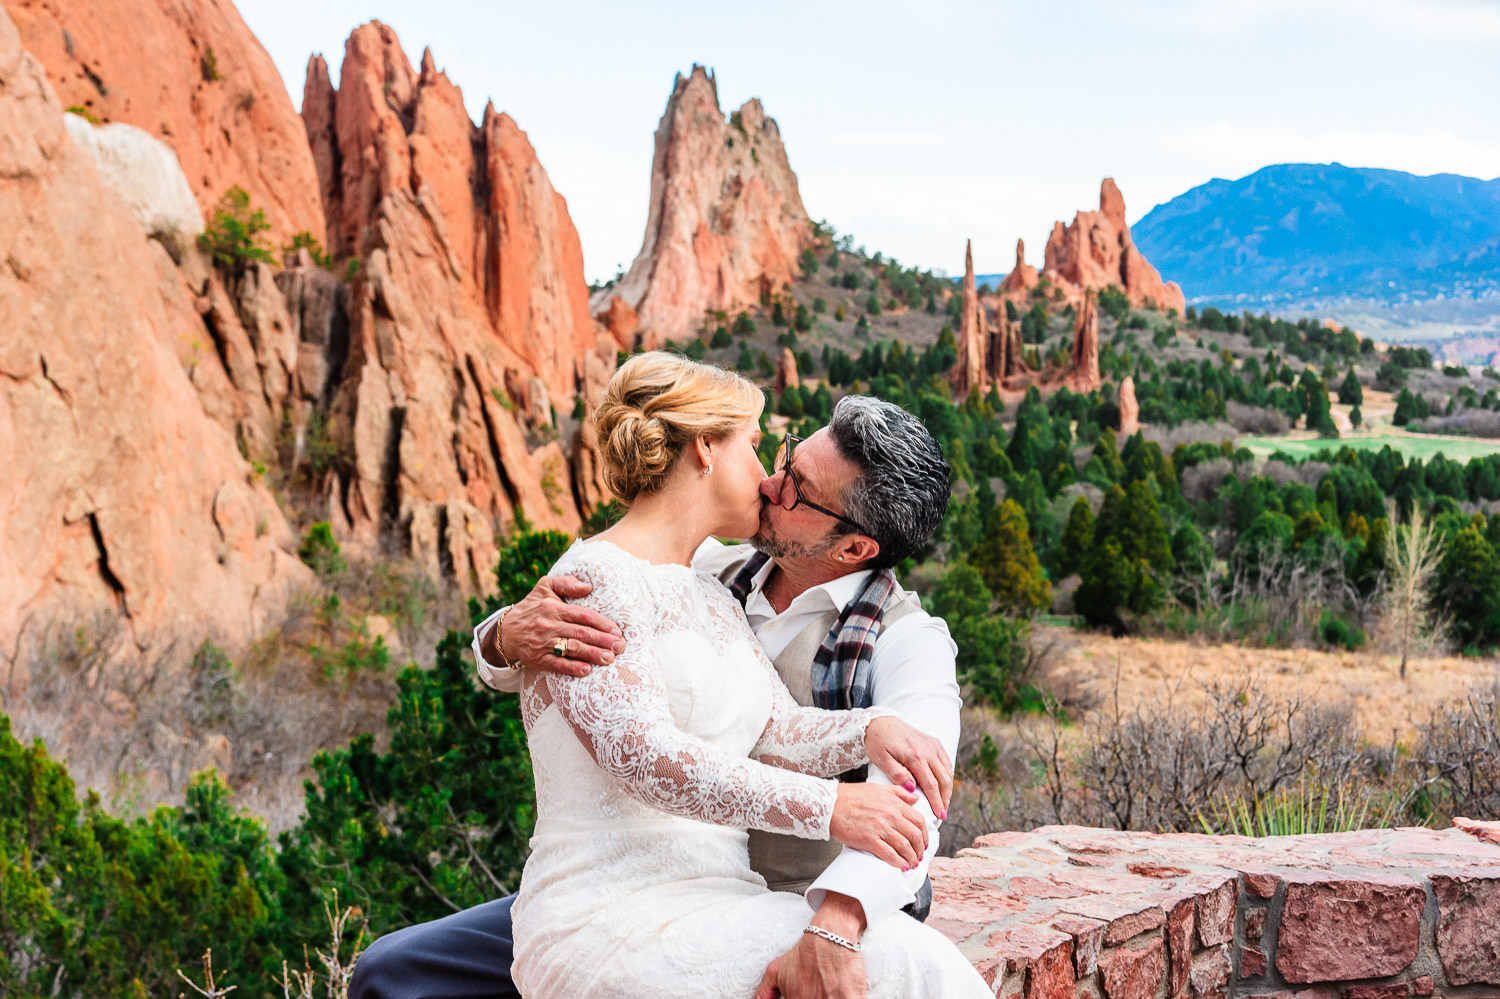 Newlyweds kiss at Valley View Pull-off during their Garden of the Gods elopement with majestic red rock formations in the background.